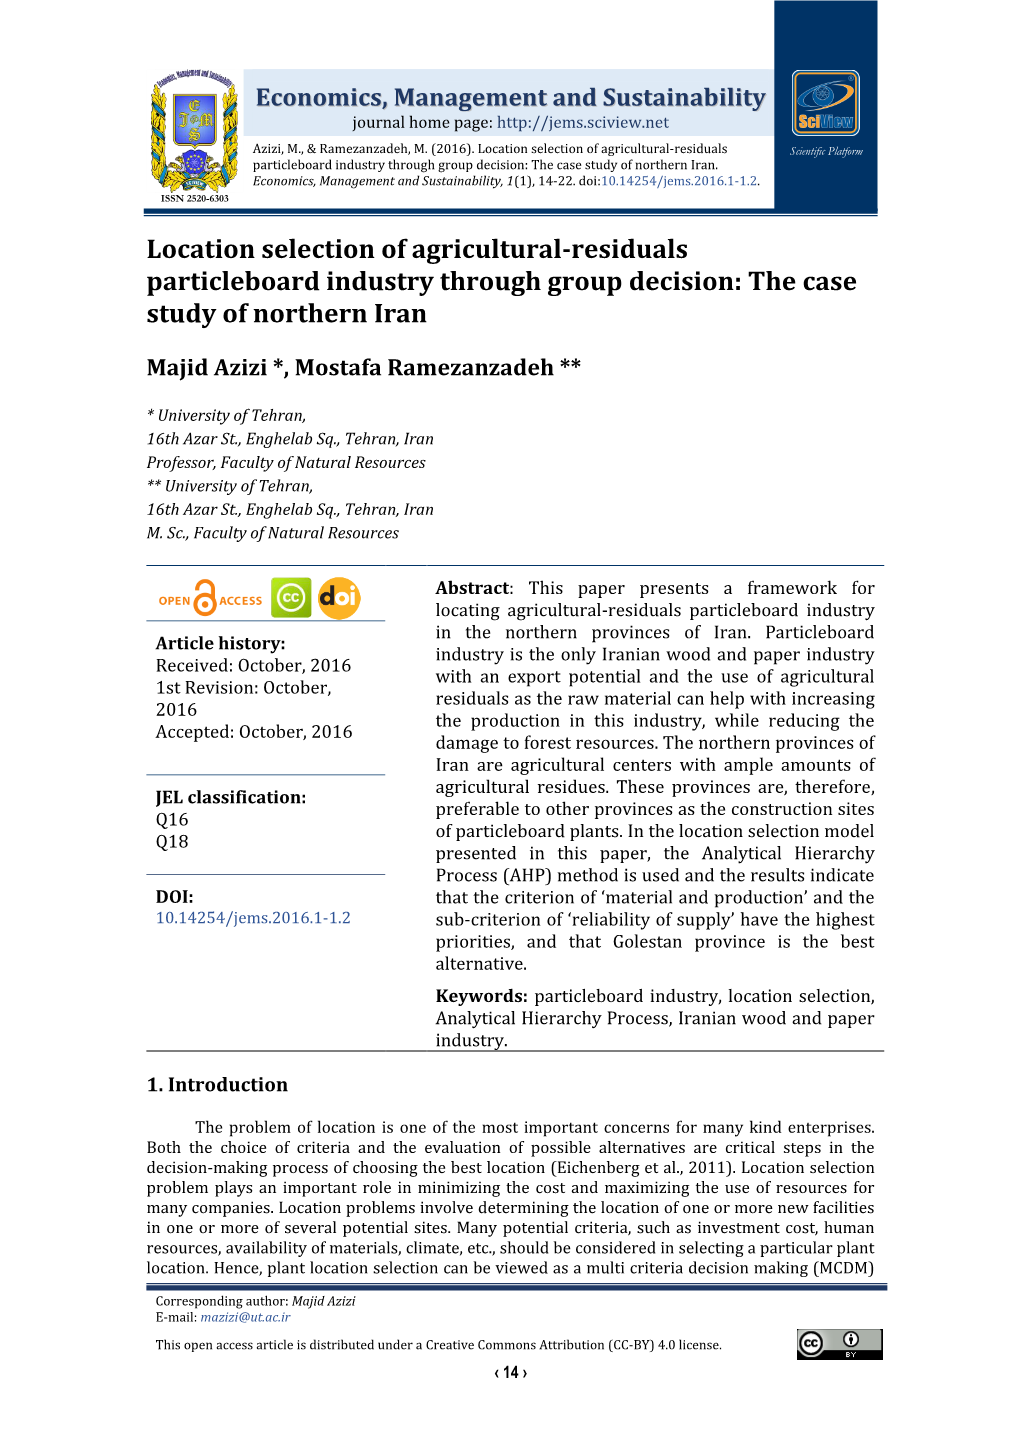 Location Selection of Agricultural-Residuals Scientific Platform Particleboard Industry Through Group Decision: the Case Study of Northern Iran